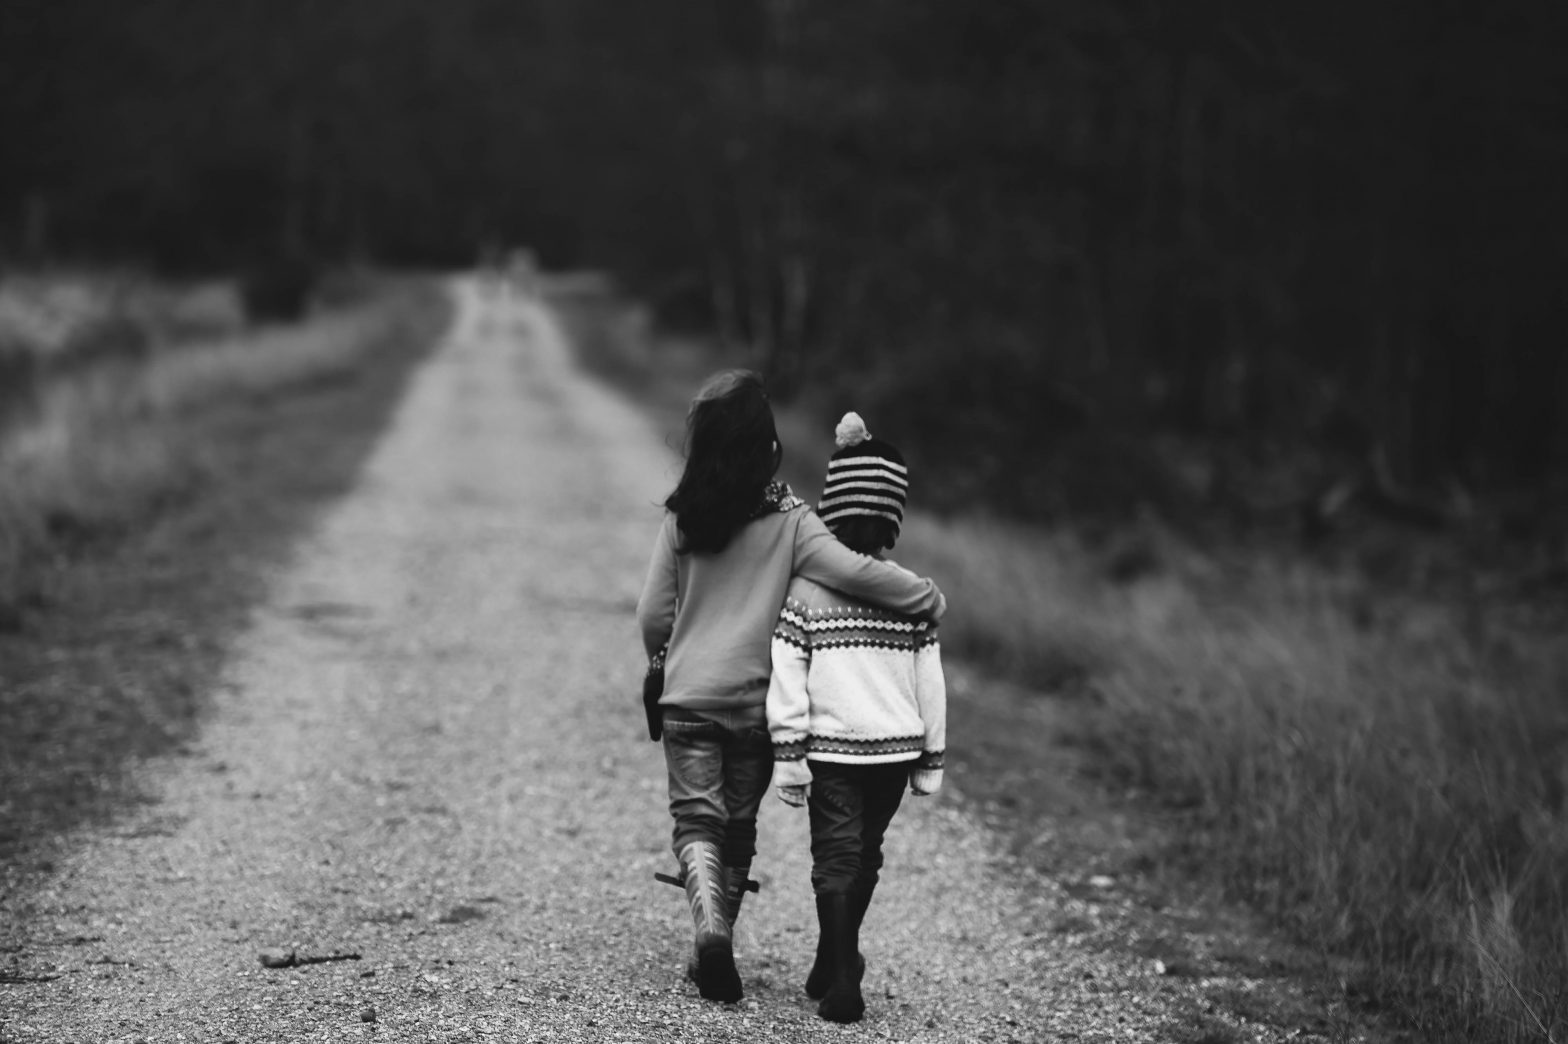 Two kids walking down a dirt road; one with their arm around the other.